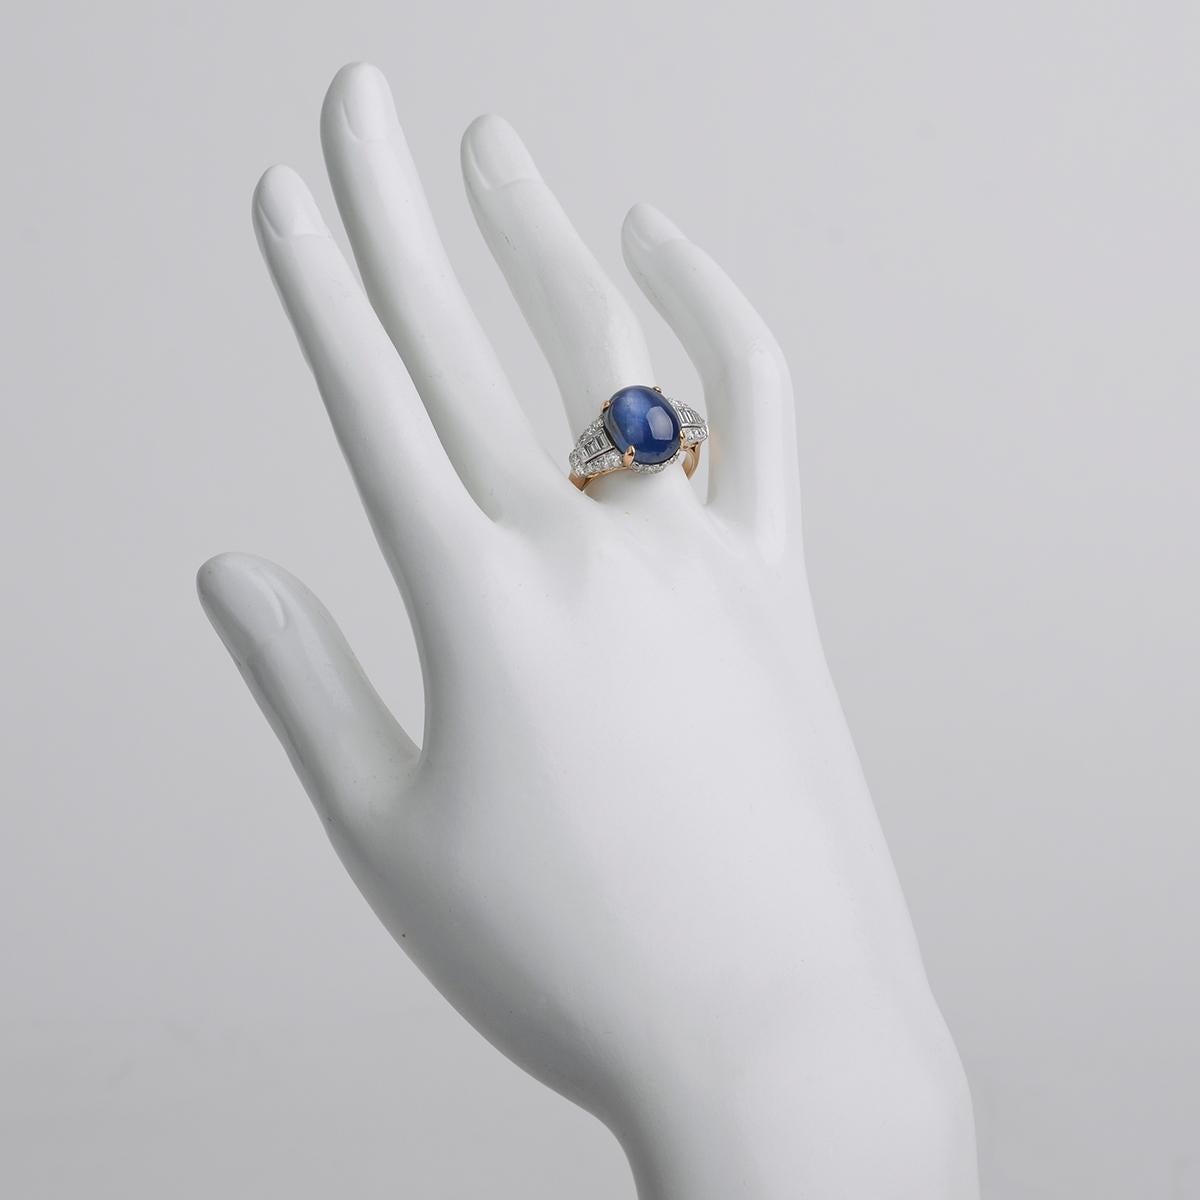 Dress ring, centering a fine cabochon-cut natural Burmese star sapphire weighing 10.18 carats, framed by baguette-cut and round-cut diamonds together weighing approximately 1.20 total carats, mounted in platinum and 18k yellow gold.